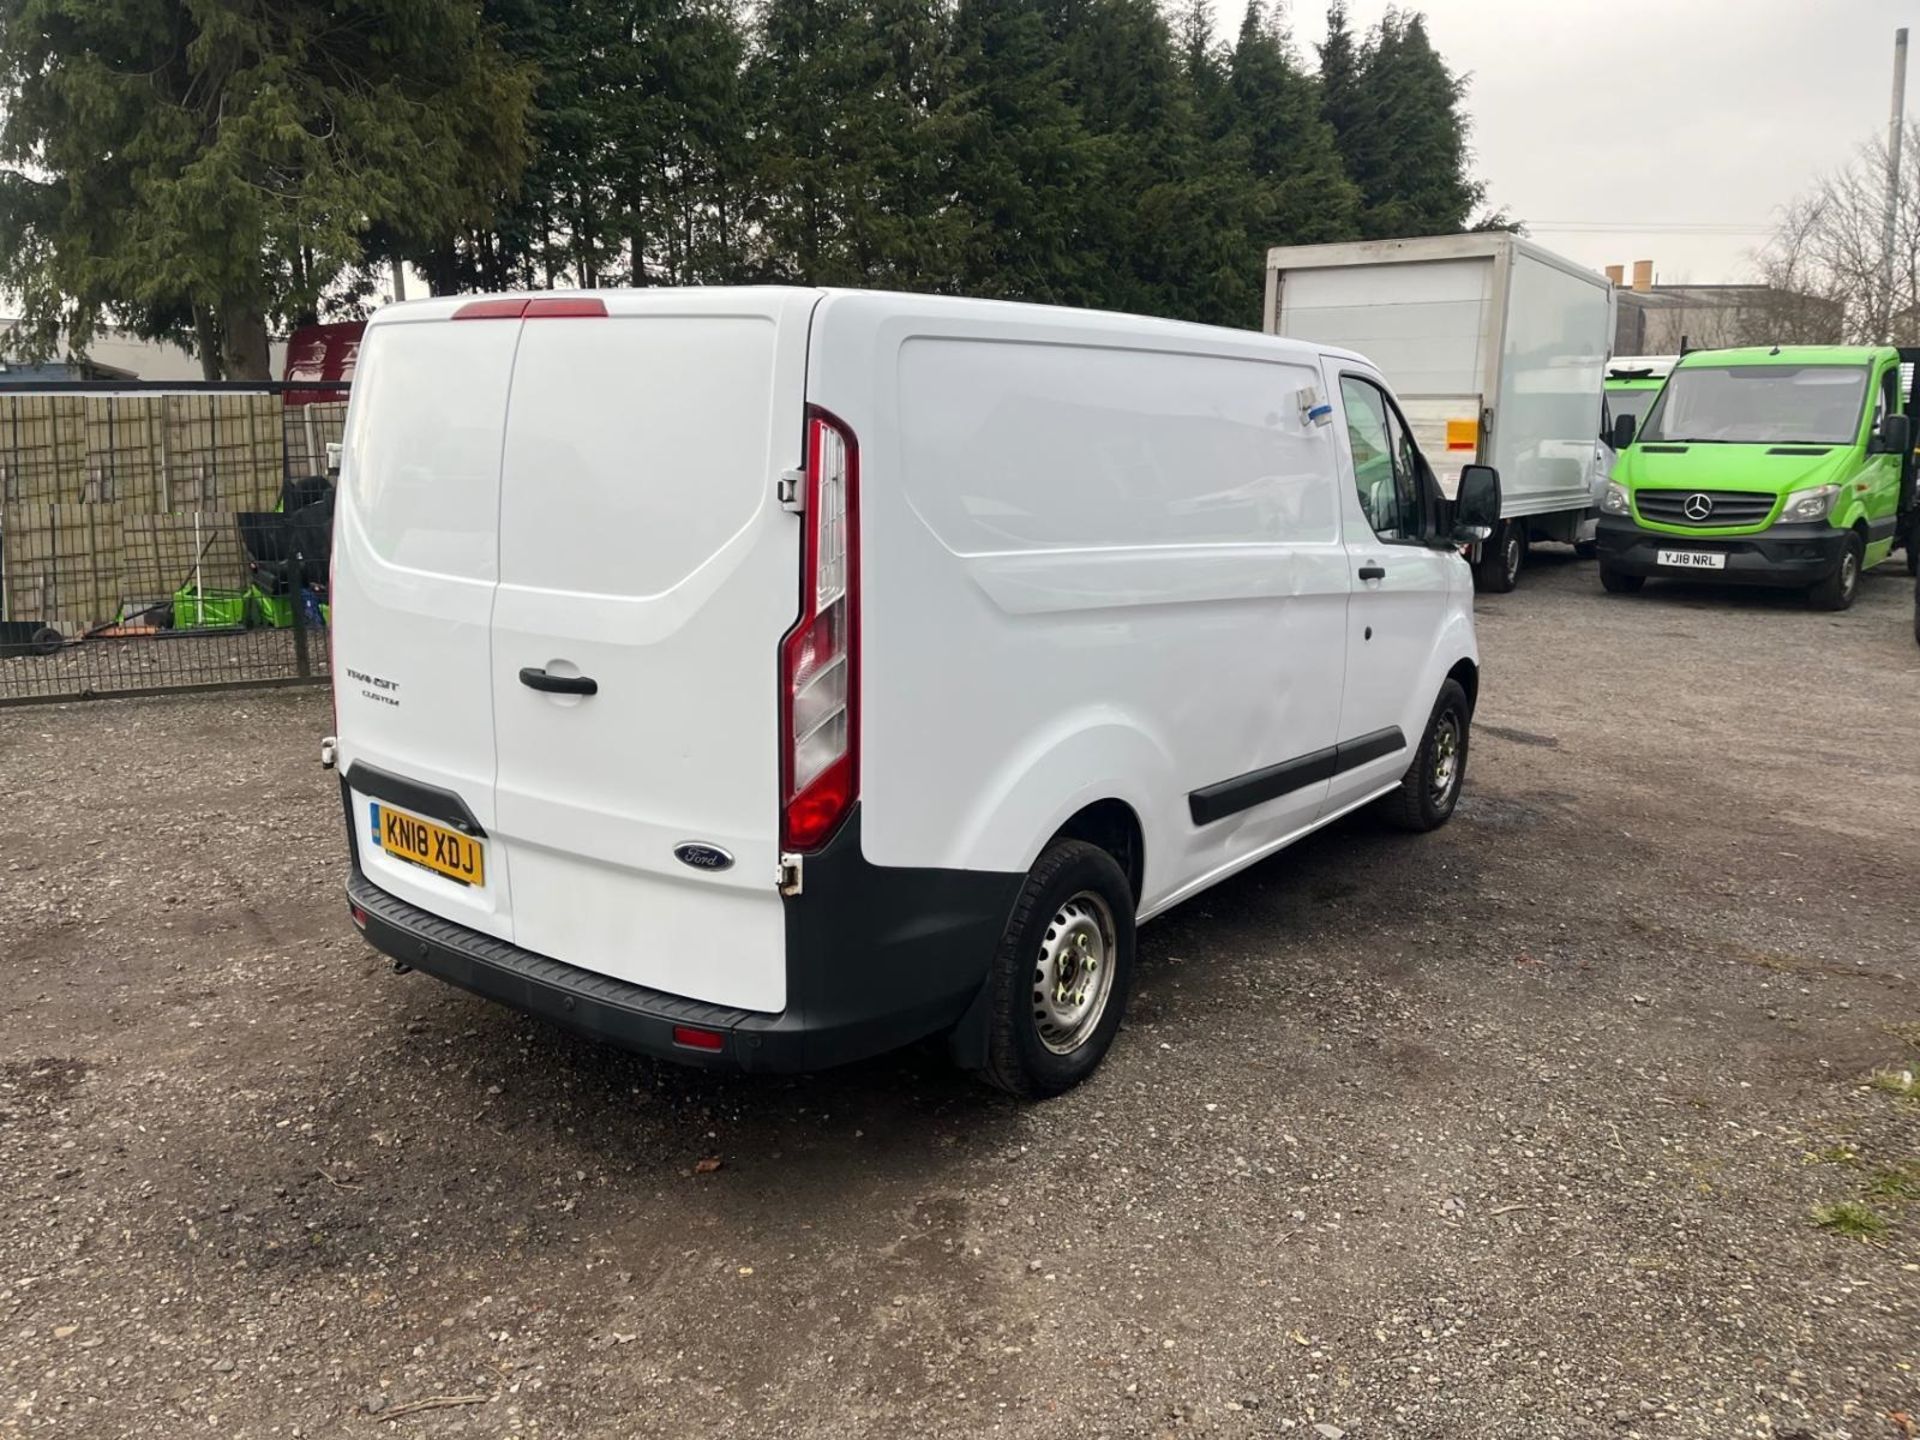 2018 FORD TRANSIT CUSTOM TDCI 130 L1 H1 SWB PANEL VAN ->>>SPECIAL CLEARANCE<<< - Image 4 of 15